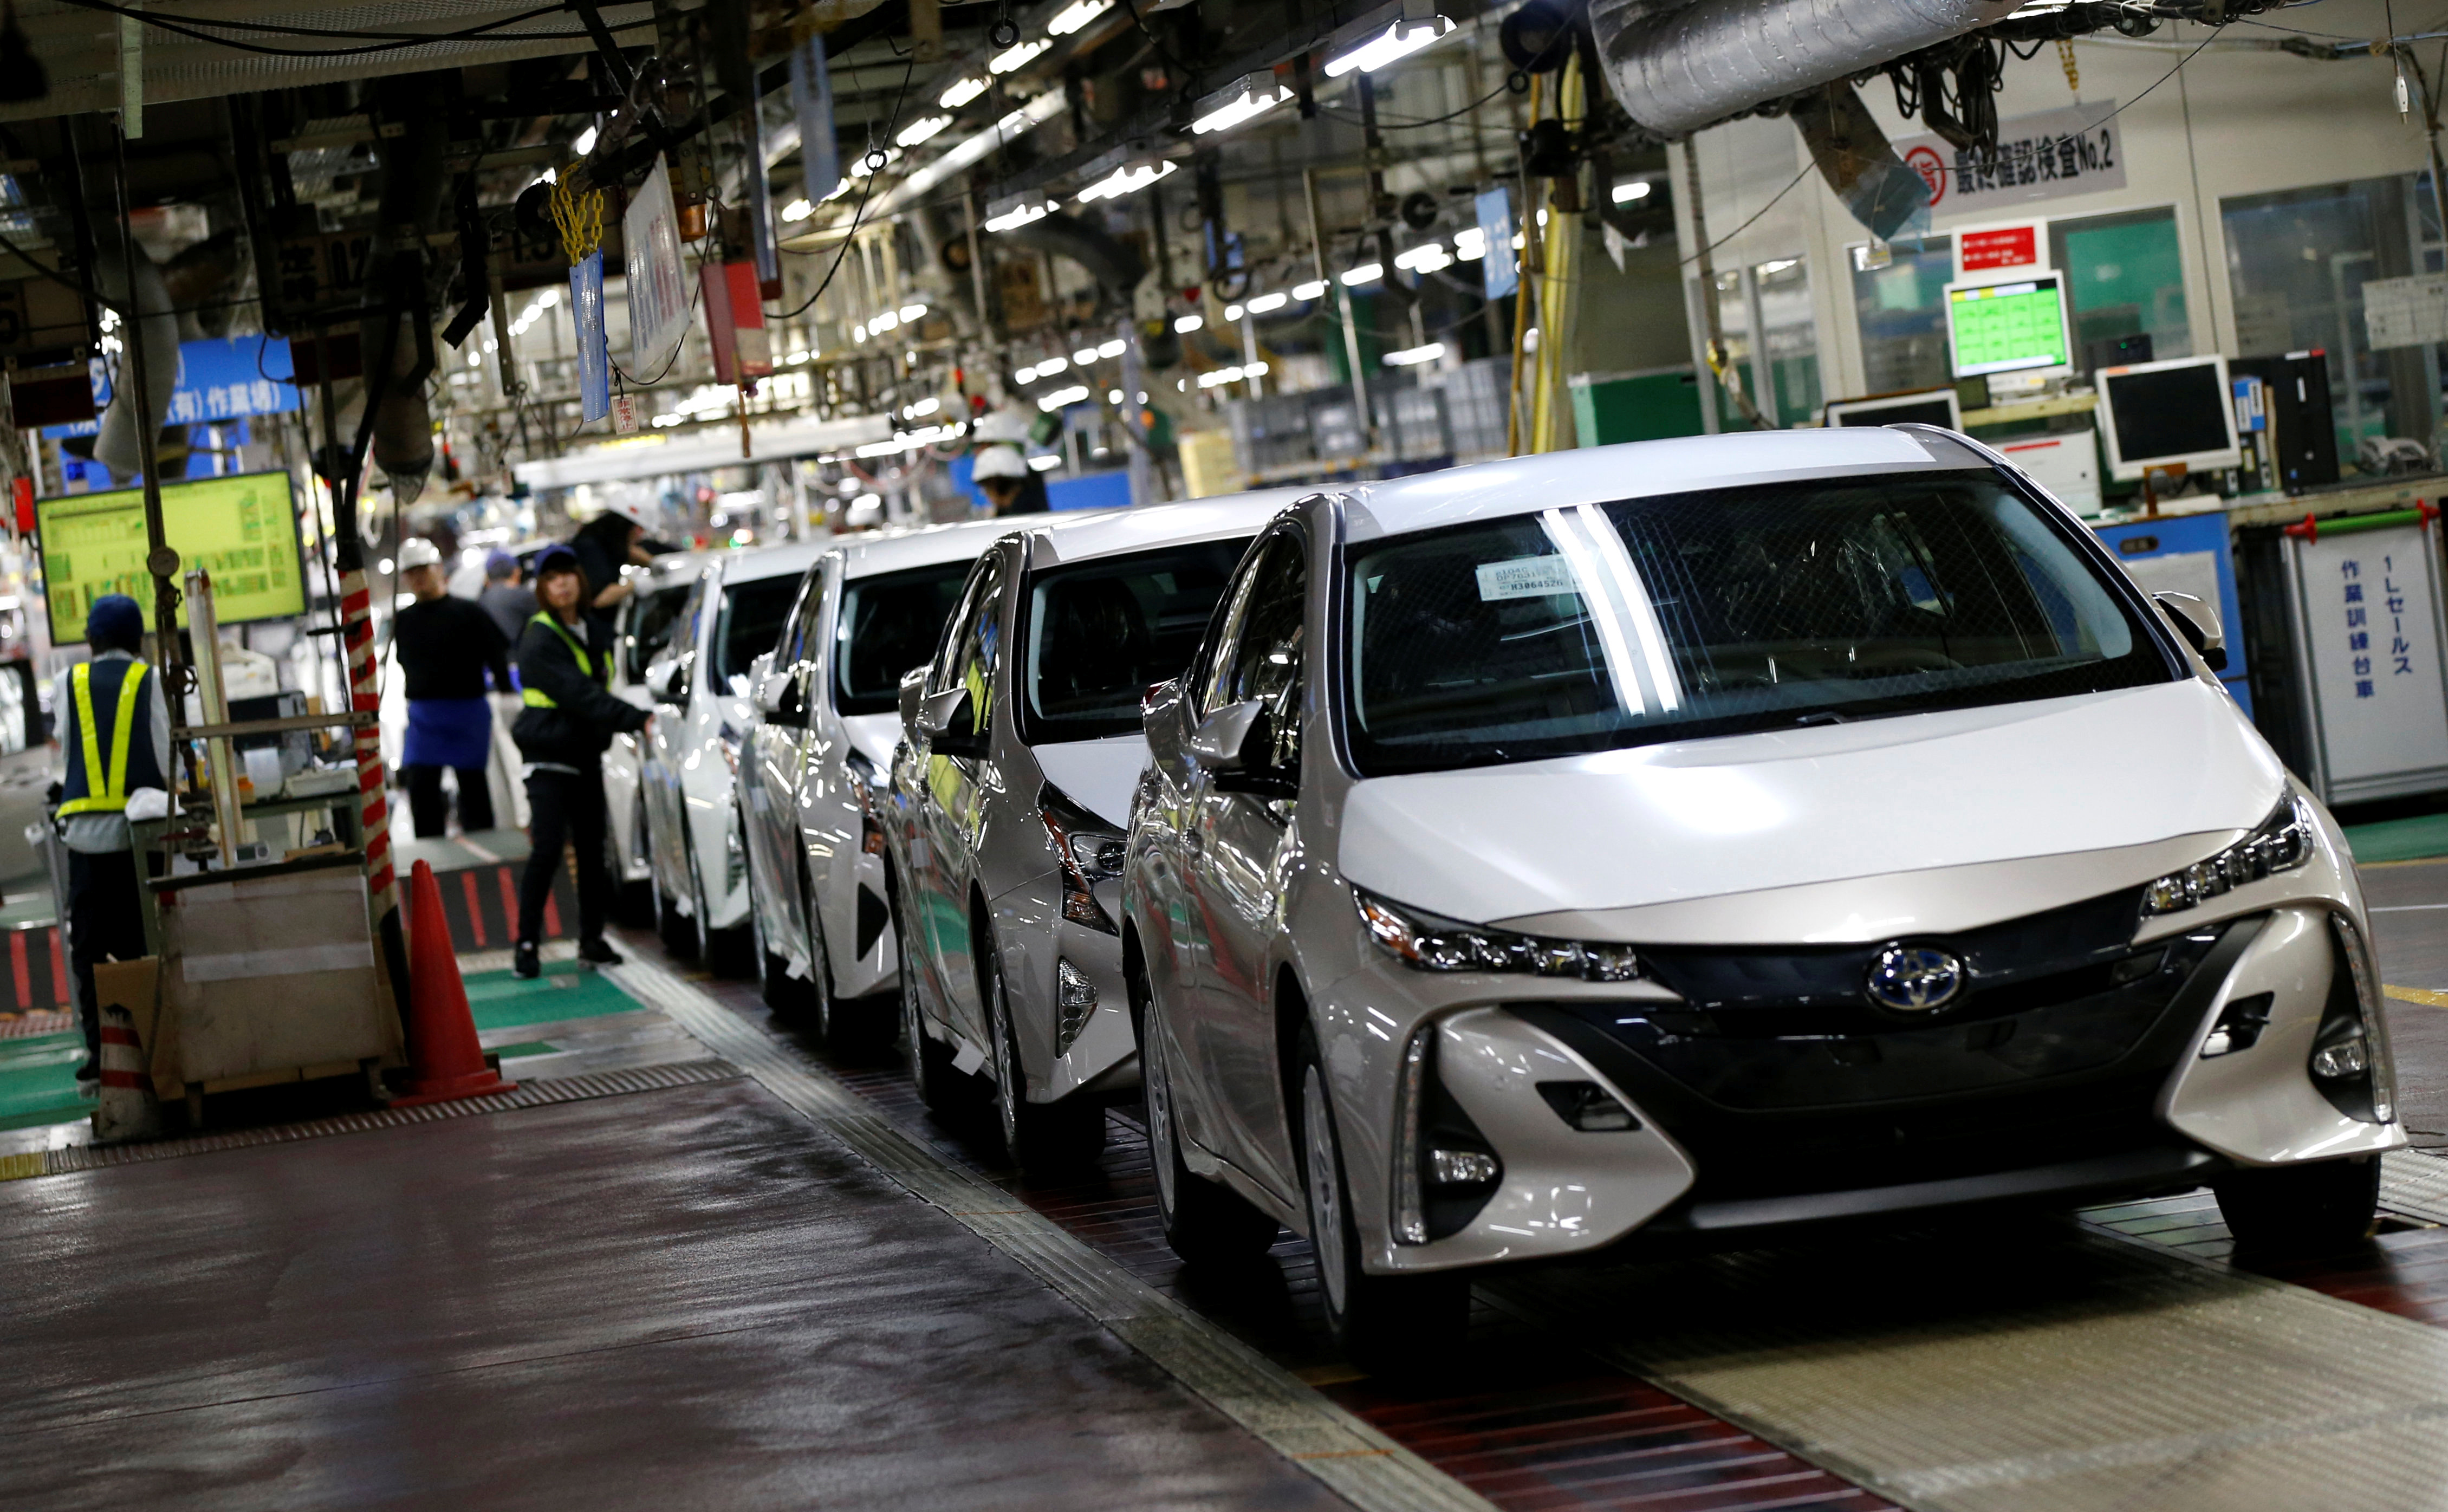 Toyota Motor Corp's Prius PHV and Prius hybrid cars are seen on the assembly line of Toyota Motor Corp's Tsutsumi plant in Toyota